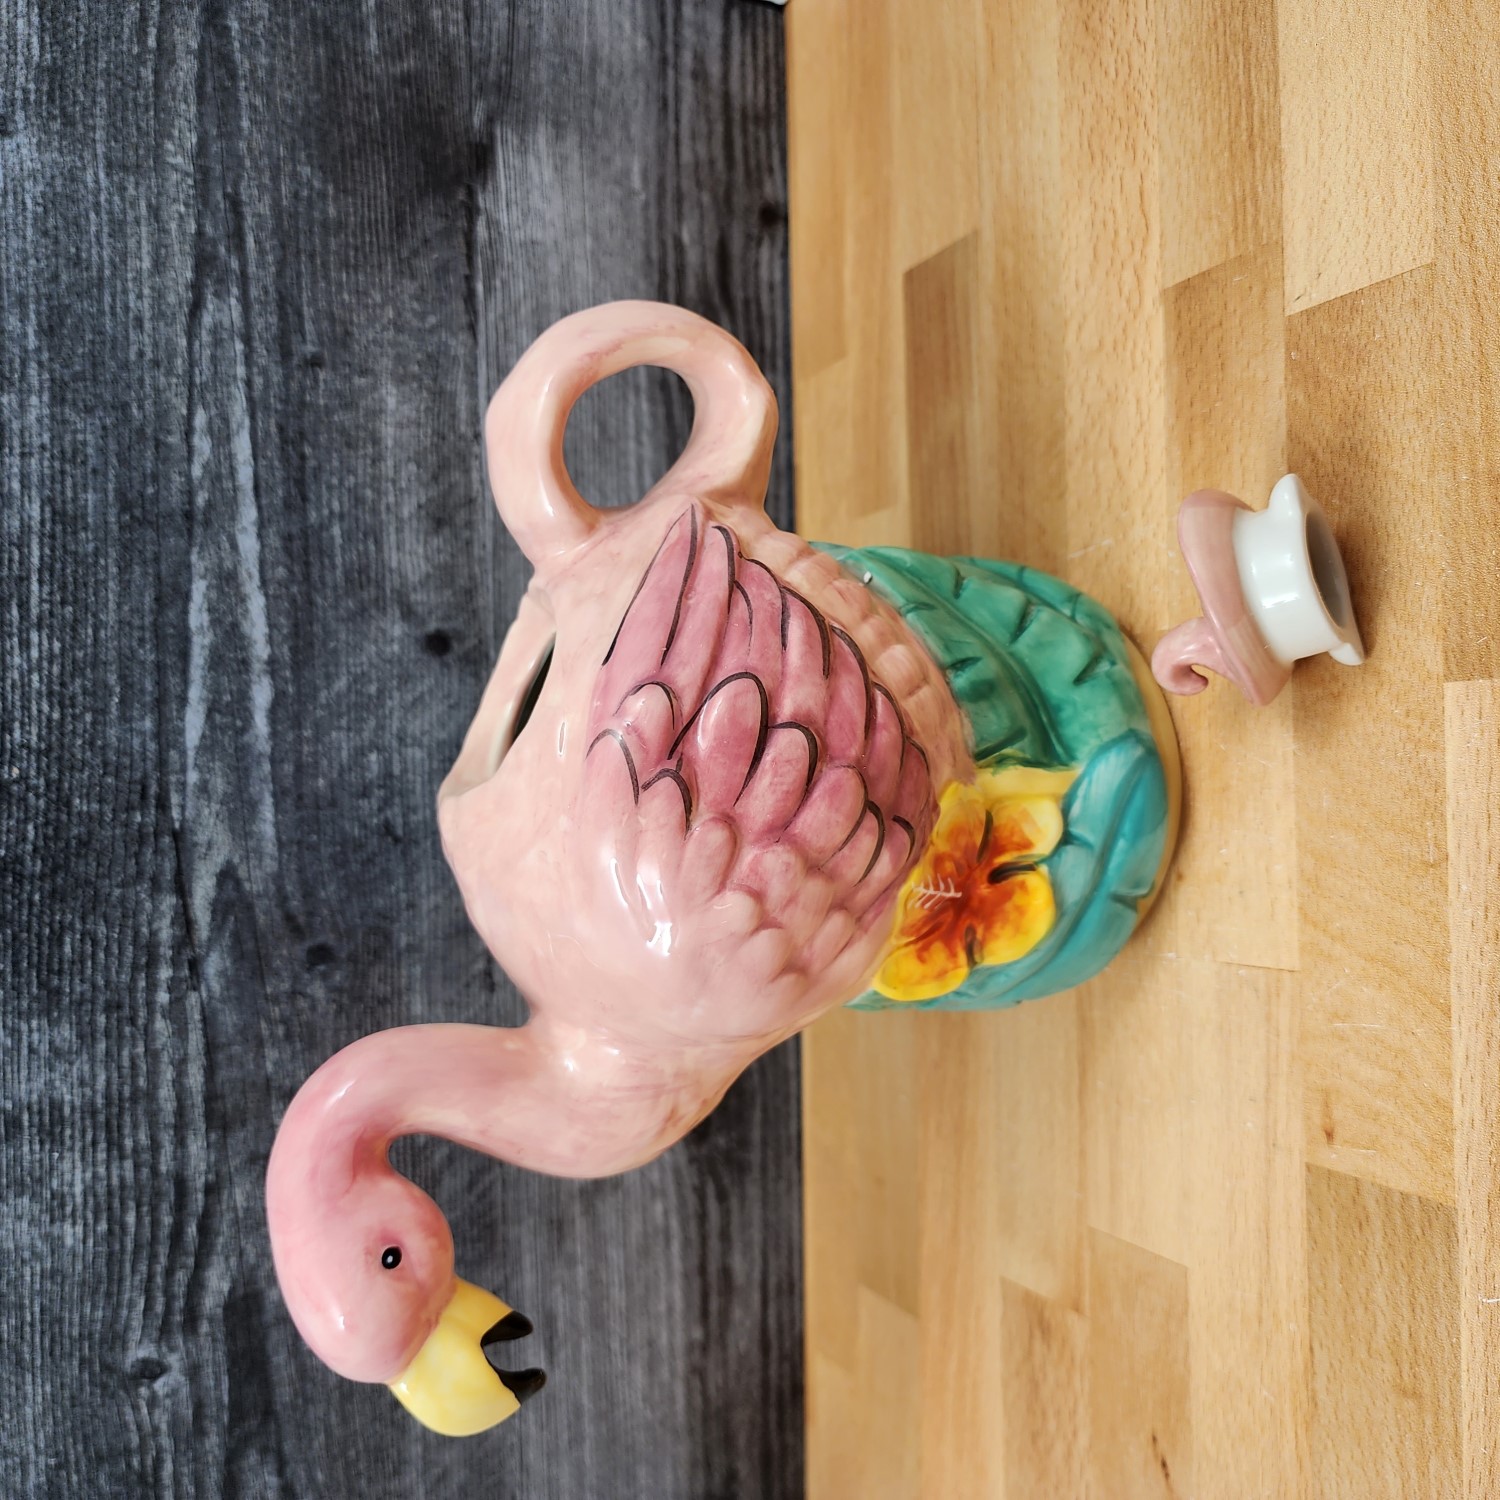 This Summer Fun Flamingo Teapot Decorative Collectable by Blue Sky Heather Goldminic is made with love by Premier Homegoods! Shop more unique gift ideas today with Spots Initiatives, the best way to support creators.